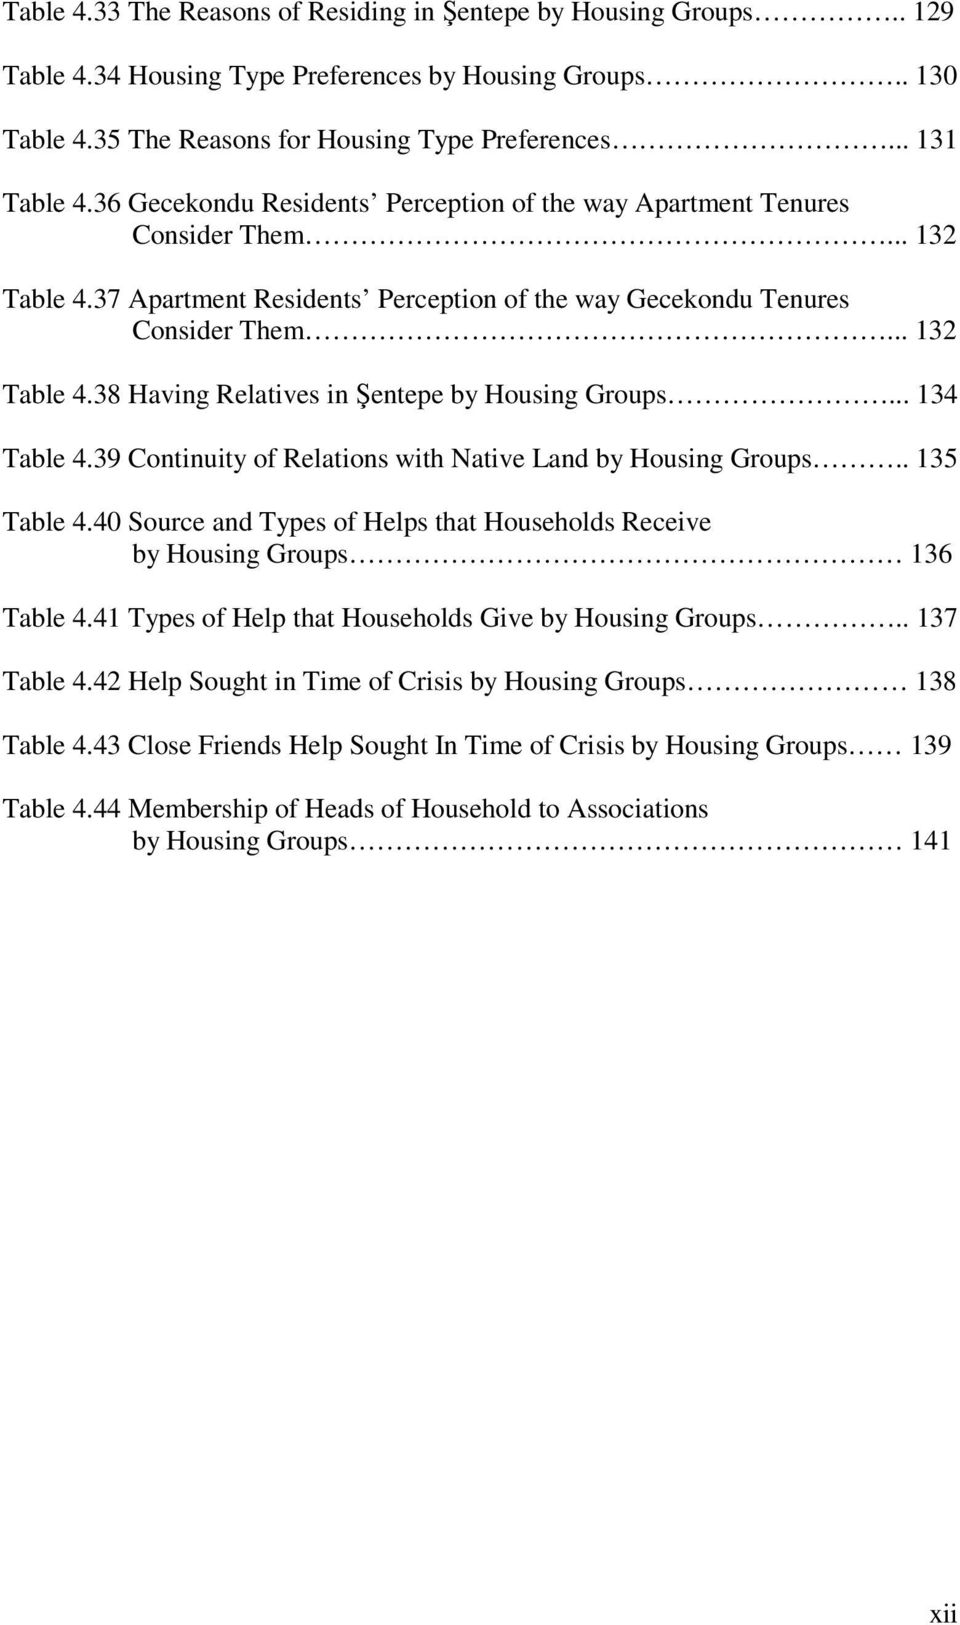 .. 134 Table 4.39 Continuity of Relations with Native Land by Housing Groups.. 135 Table 4.40 Source and Types of Helps that Households Receive by Housing Groups 136 Table 4.